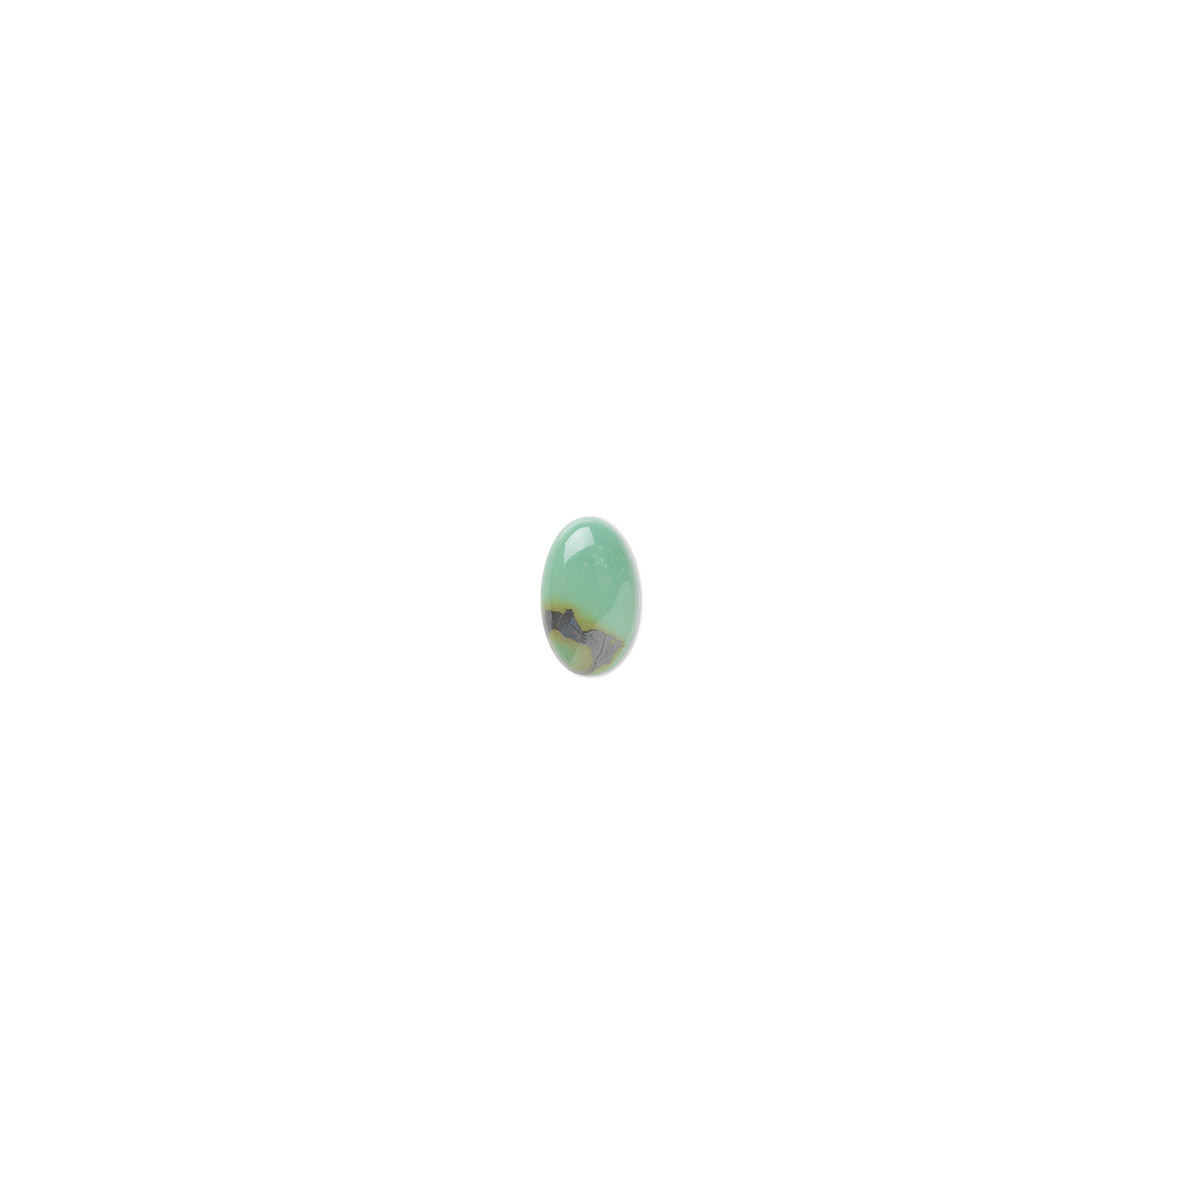 Cabochon Turquoise Dyed Stabilized 5x3mm Calibrated Oval B Grade